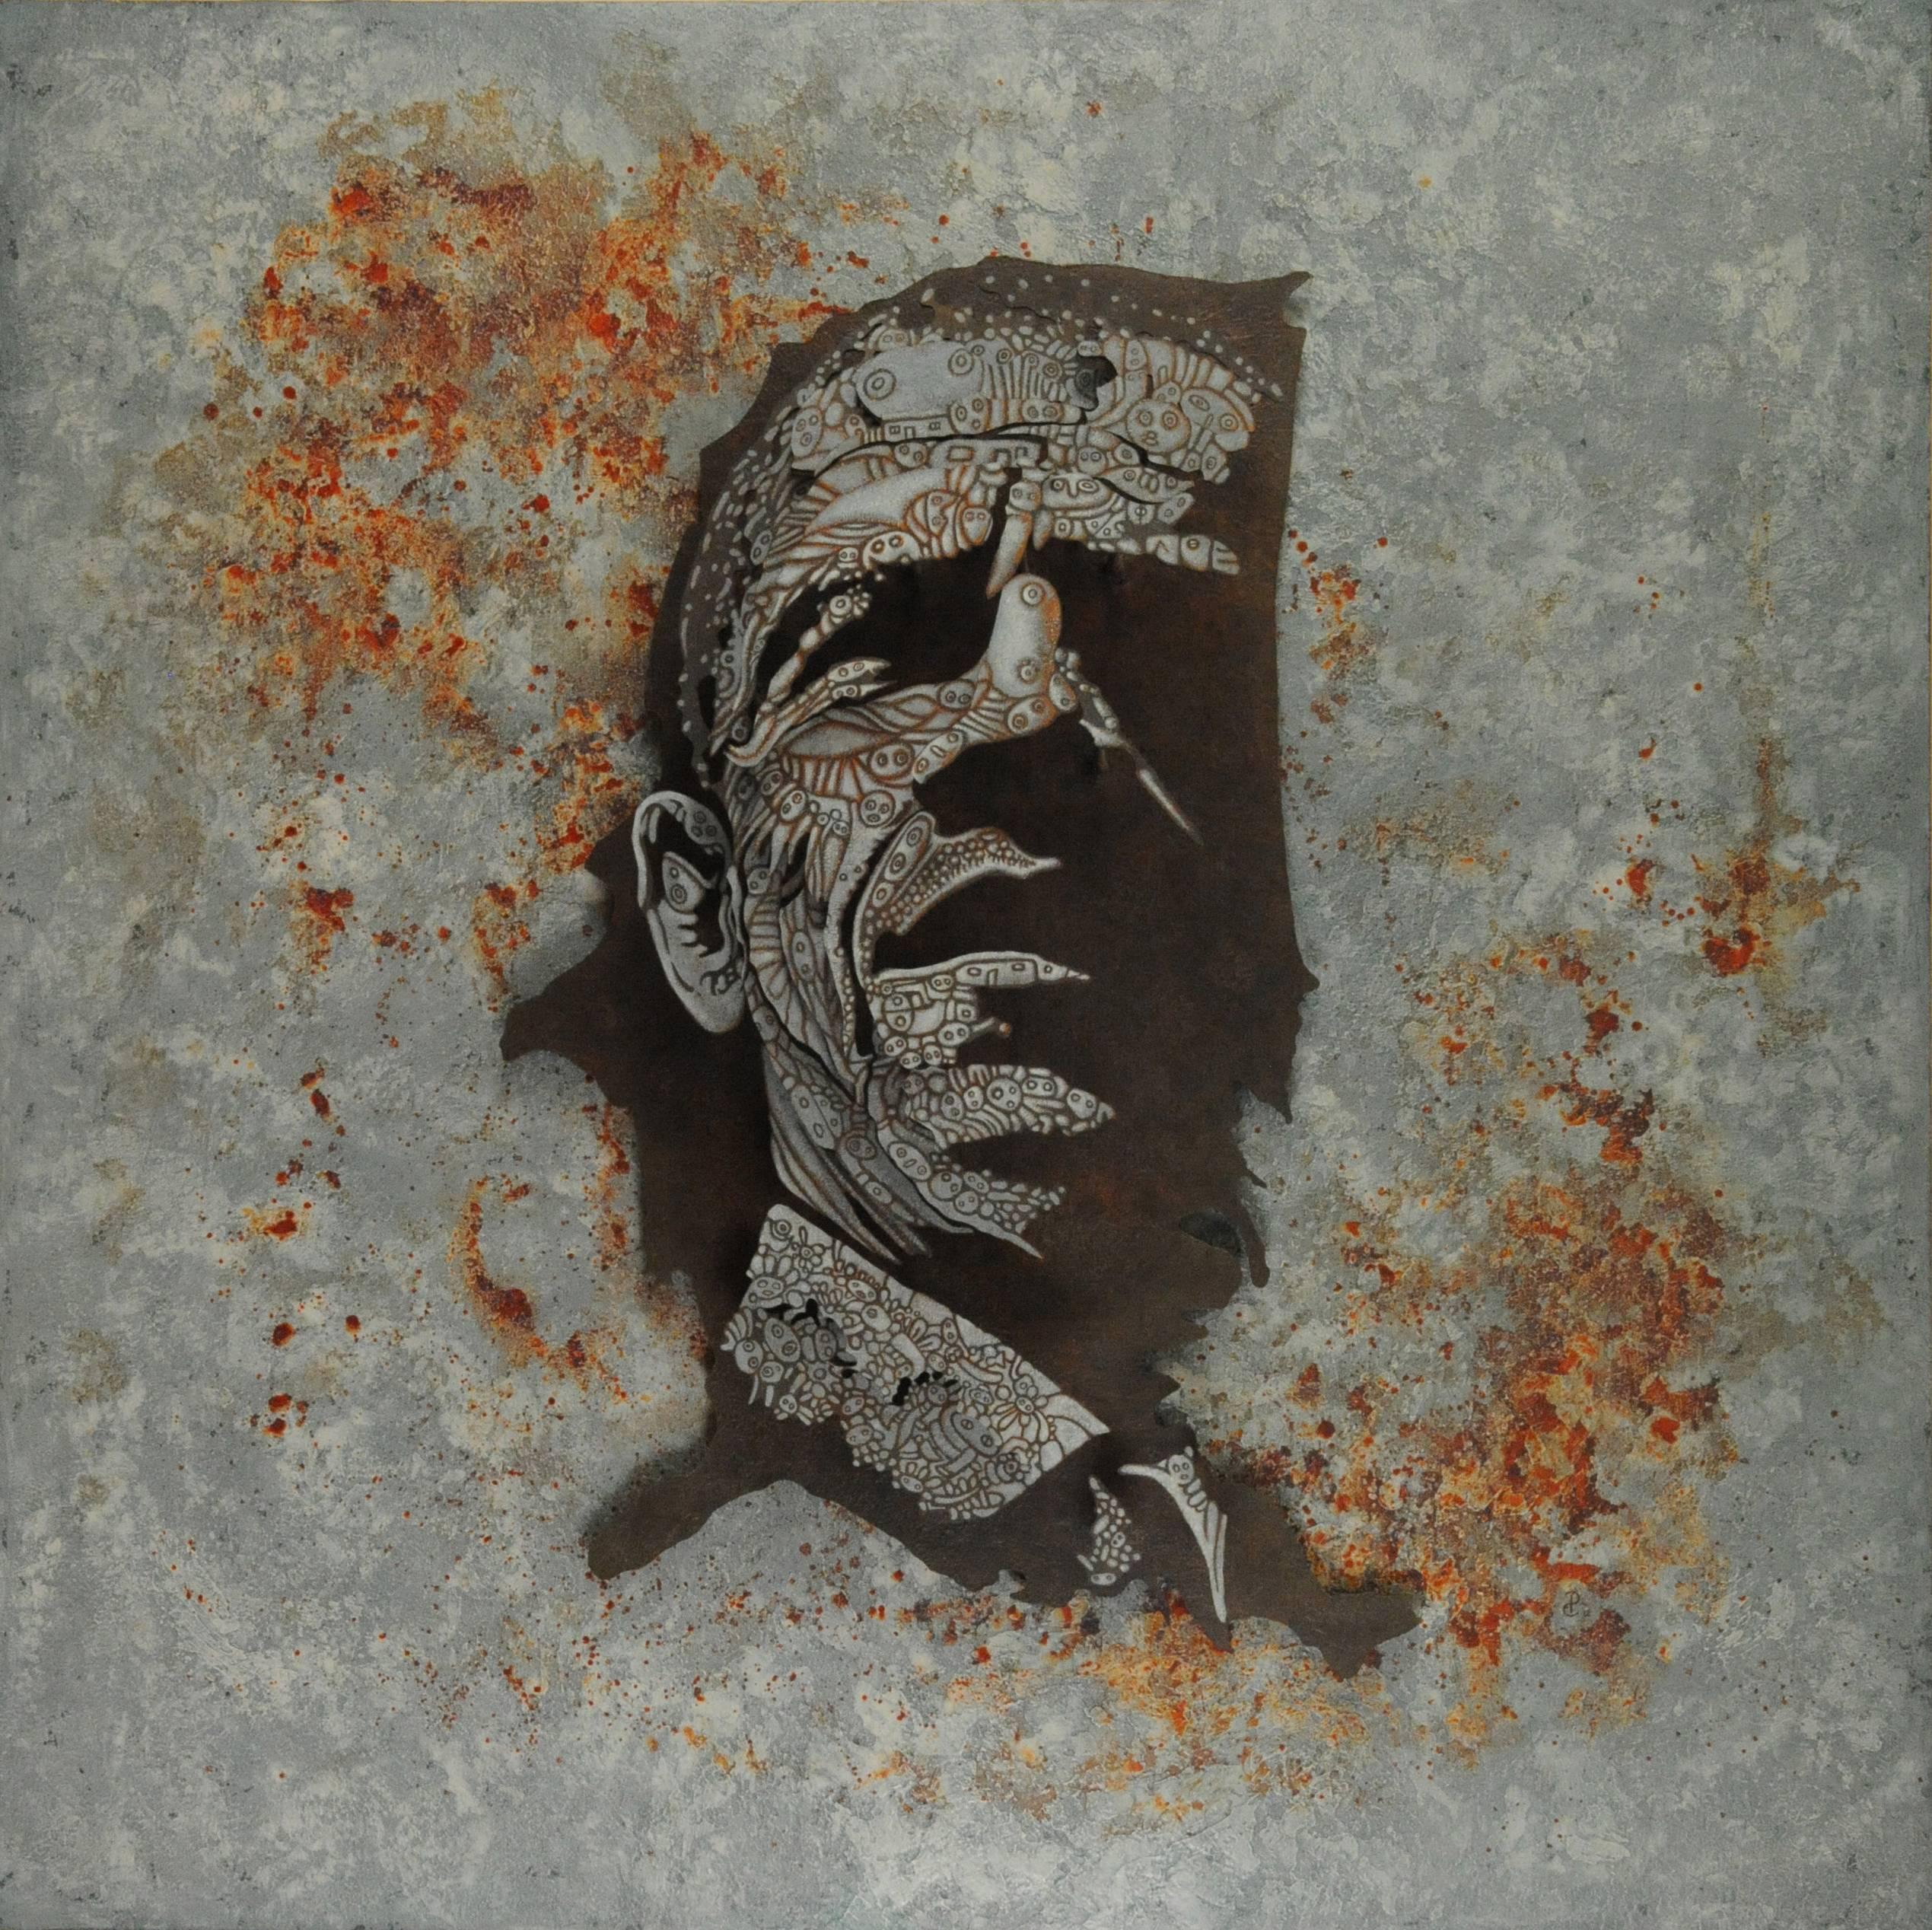 Pablo Caviedes Portrait Painting - Barack Obama's 3D portrait "On The Map" - large scale 3D wall installation